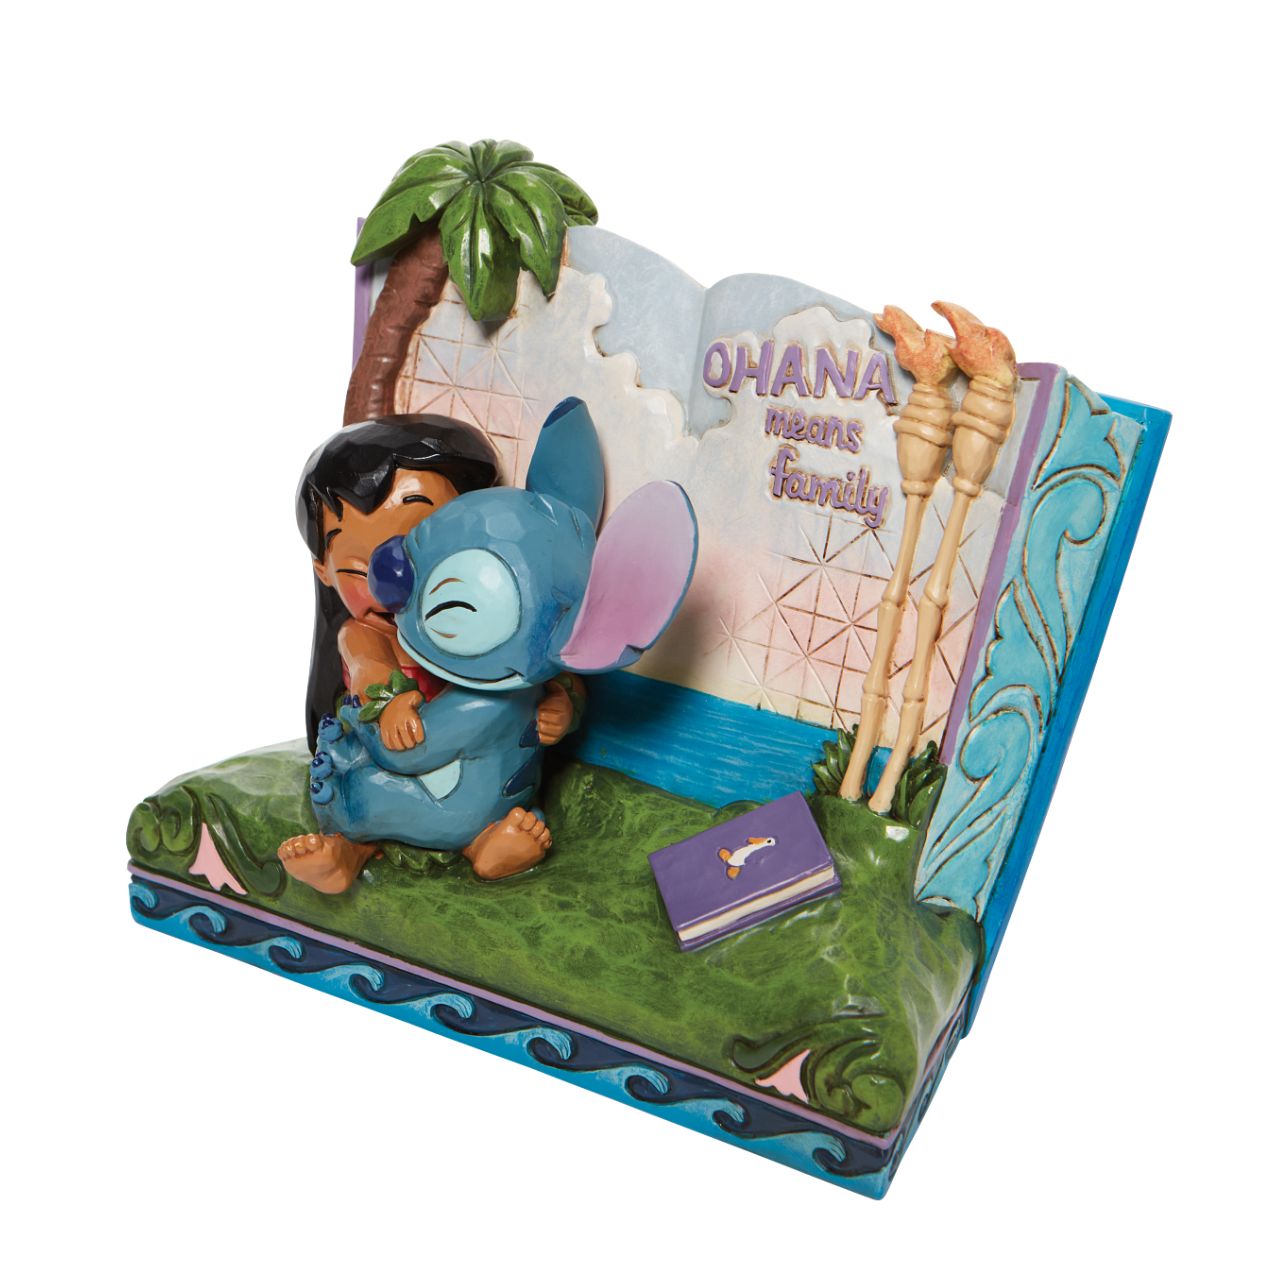 Disney Showcase Lilo and Stitch Storybook Figurine  Twenty years ago, Lilo & Stitch awarded audiences with an out of this world tale of friendship that hit us all close to home. In this piece, Lilo and Stitch hug within a storybook, allowing us all to learn a lesson of what family really means.